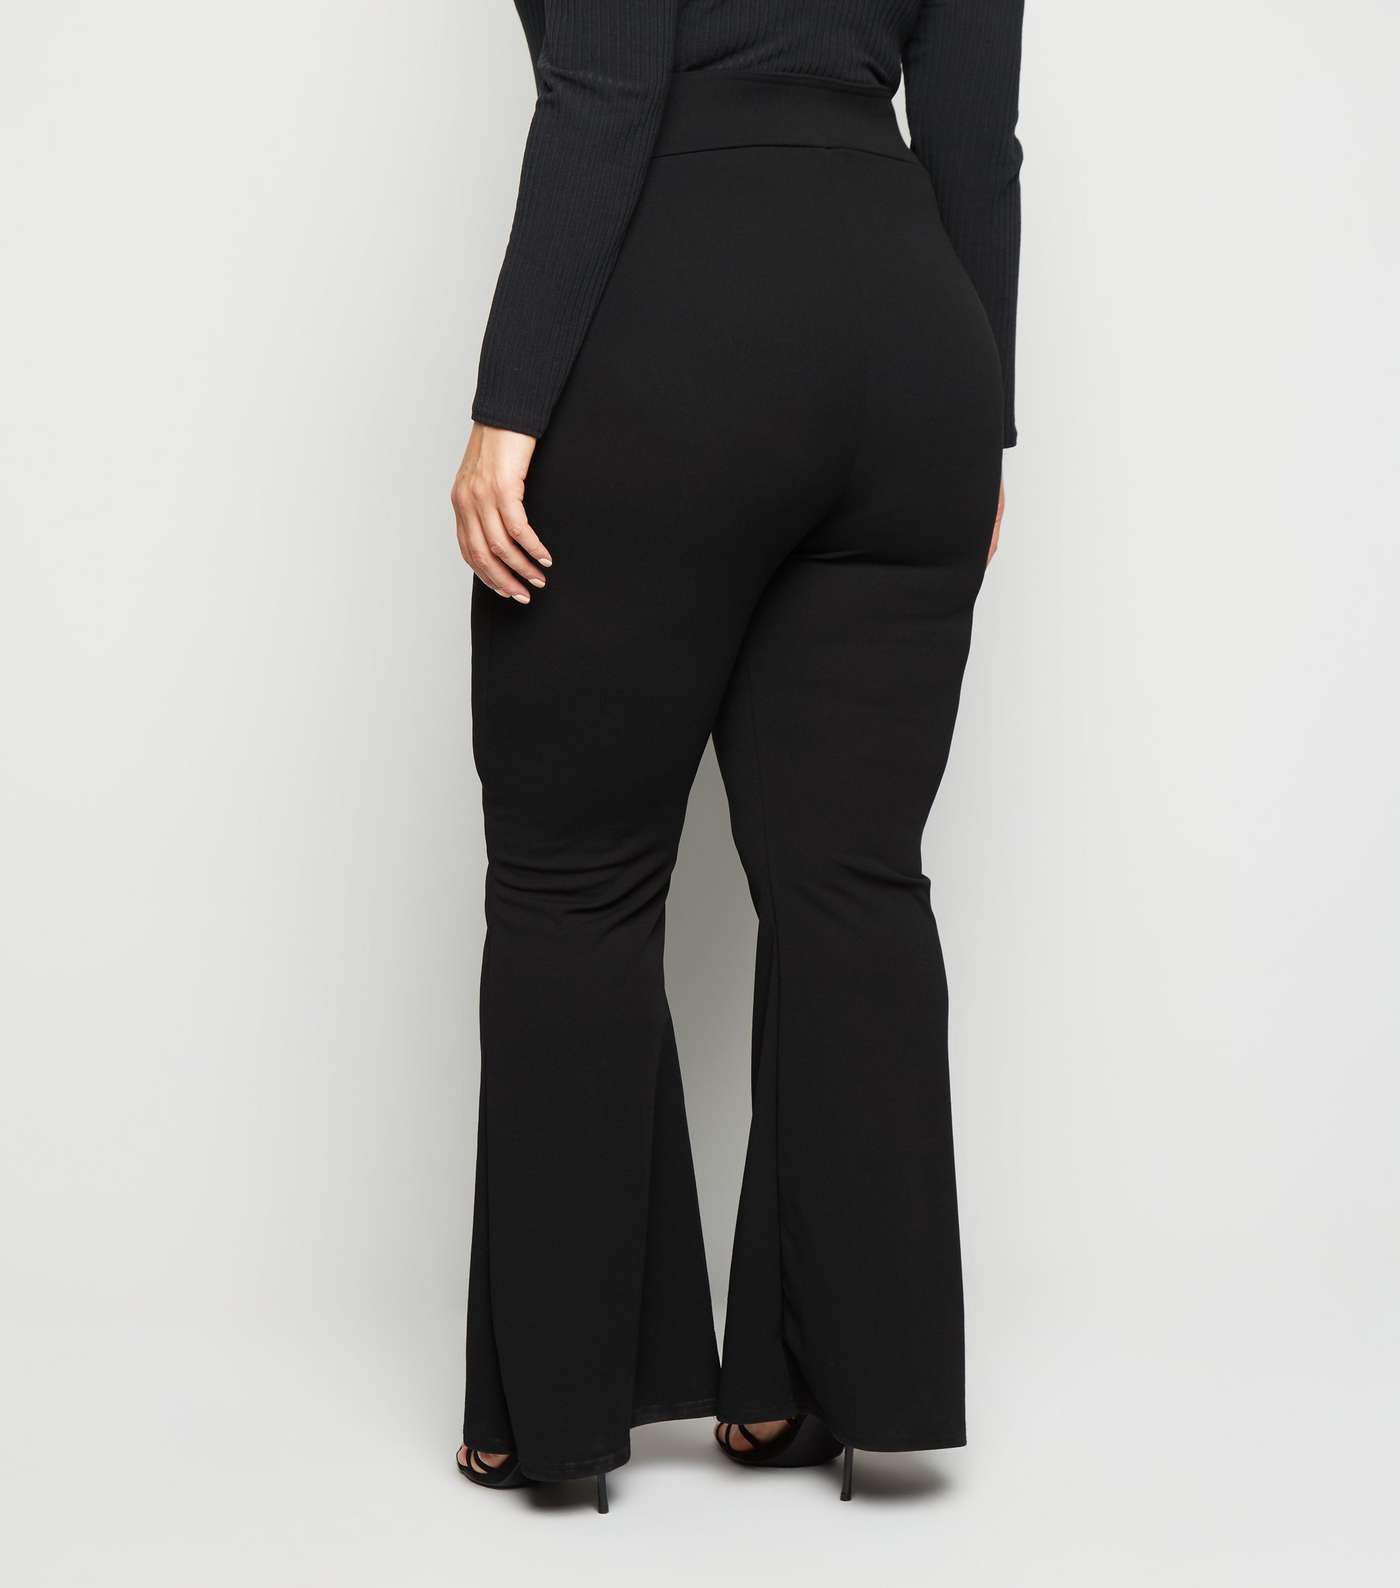 Just Curvy Black High Waist Flared Trousers Image 3